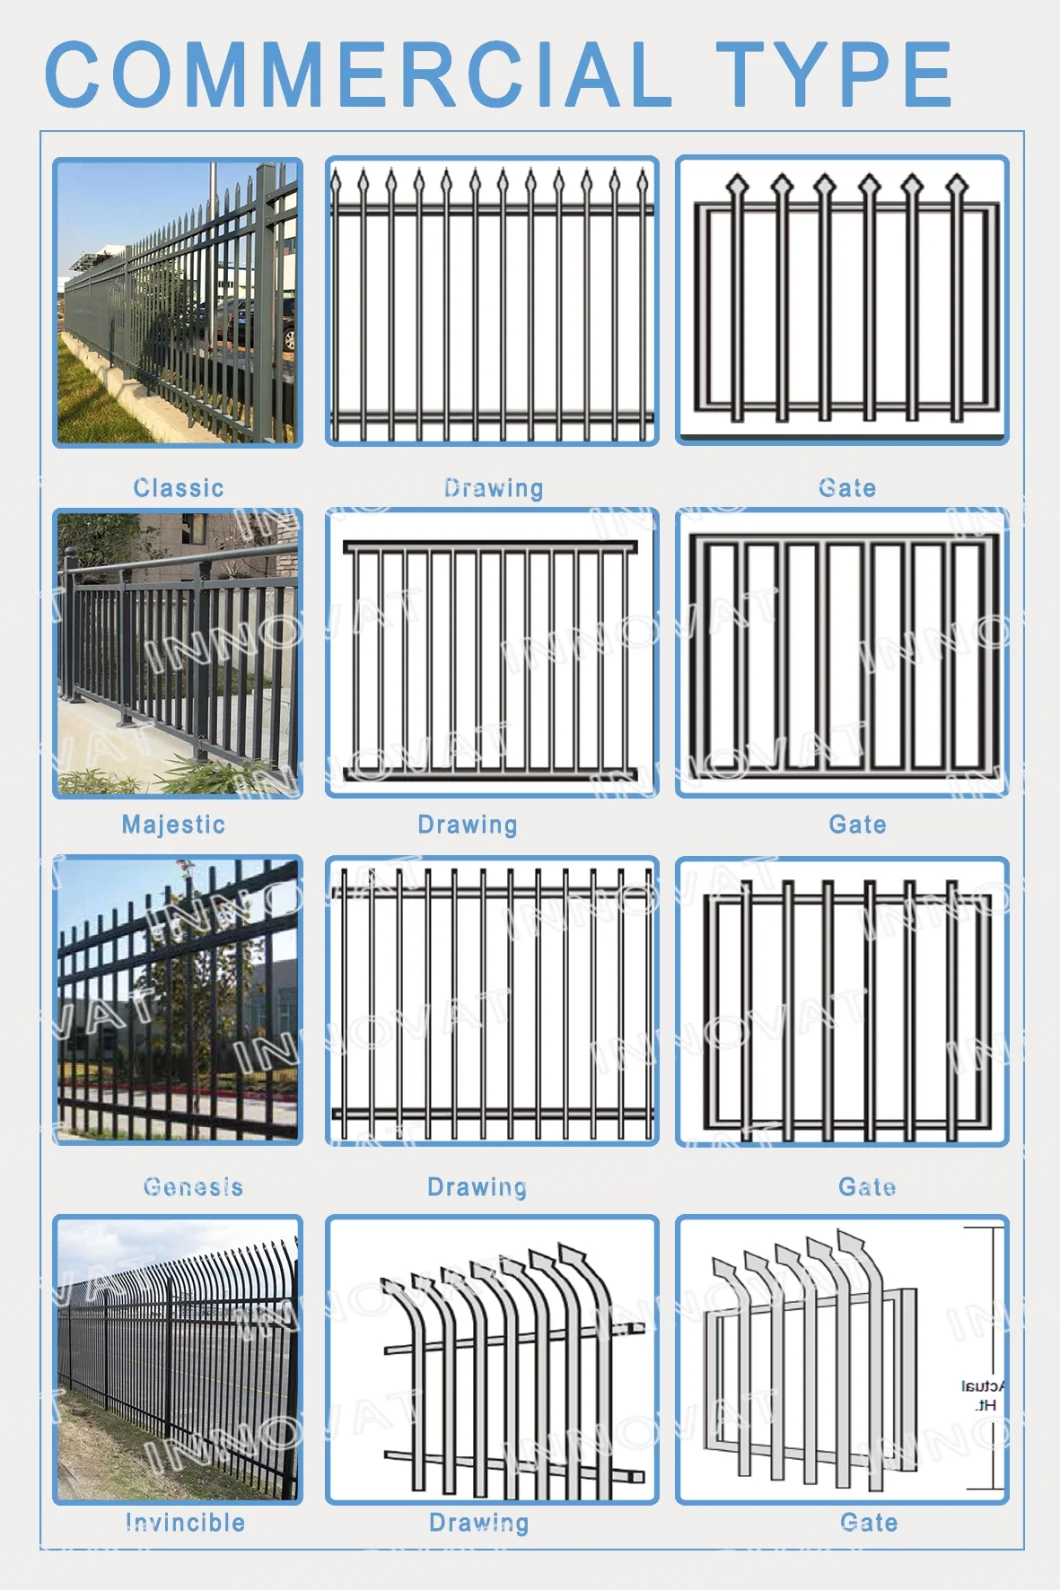 HS-Mg11 New Models House Fancy Boundary Wall Fence Gates Door Design Electric Sliding Wrought Iron Grill Driveway Gate